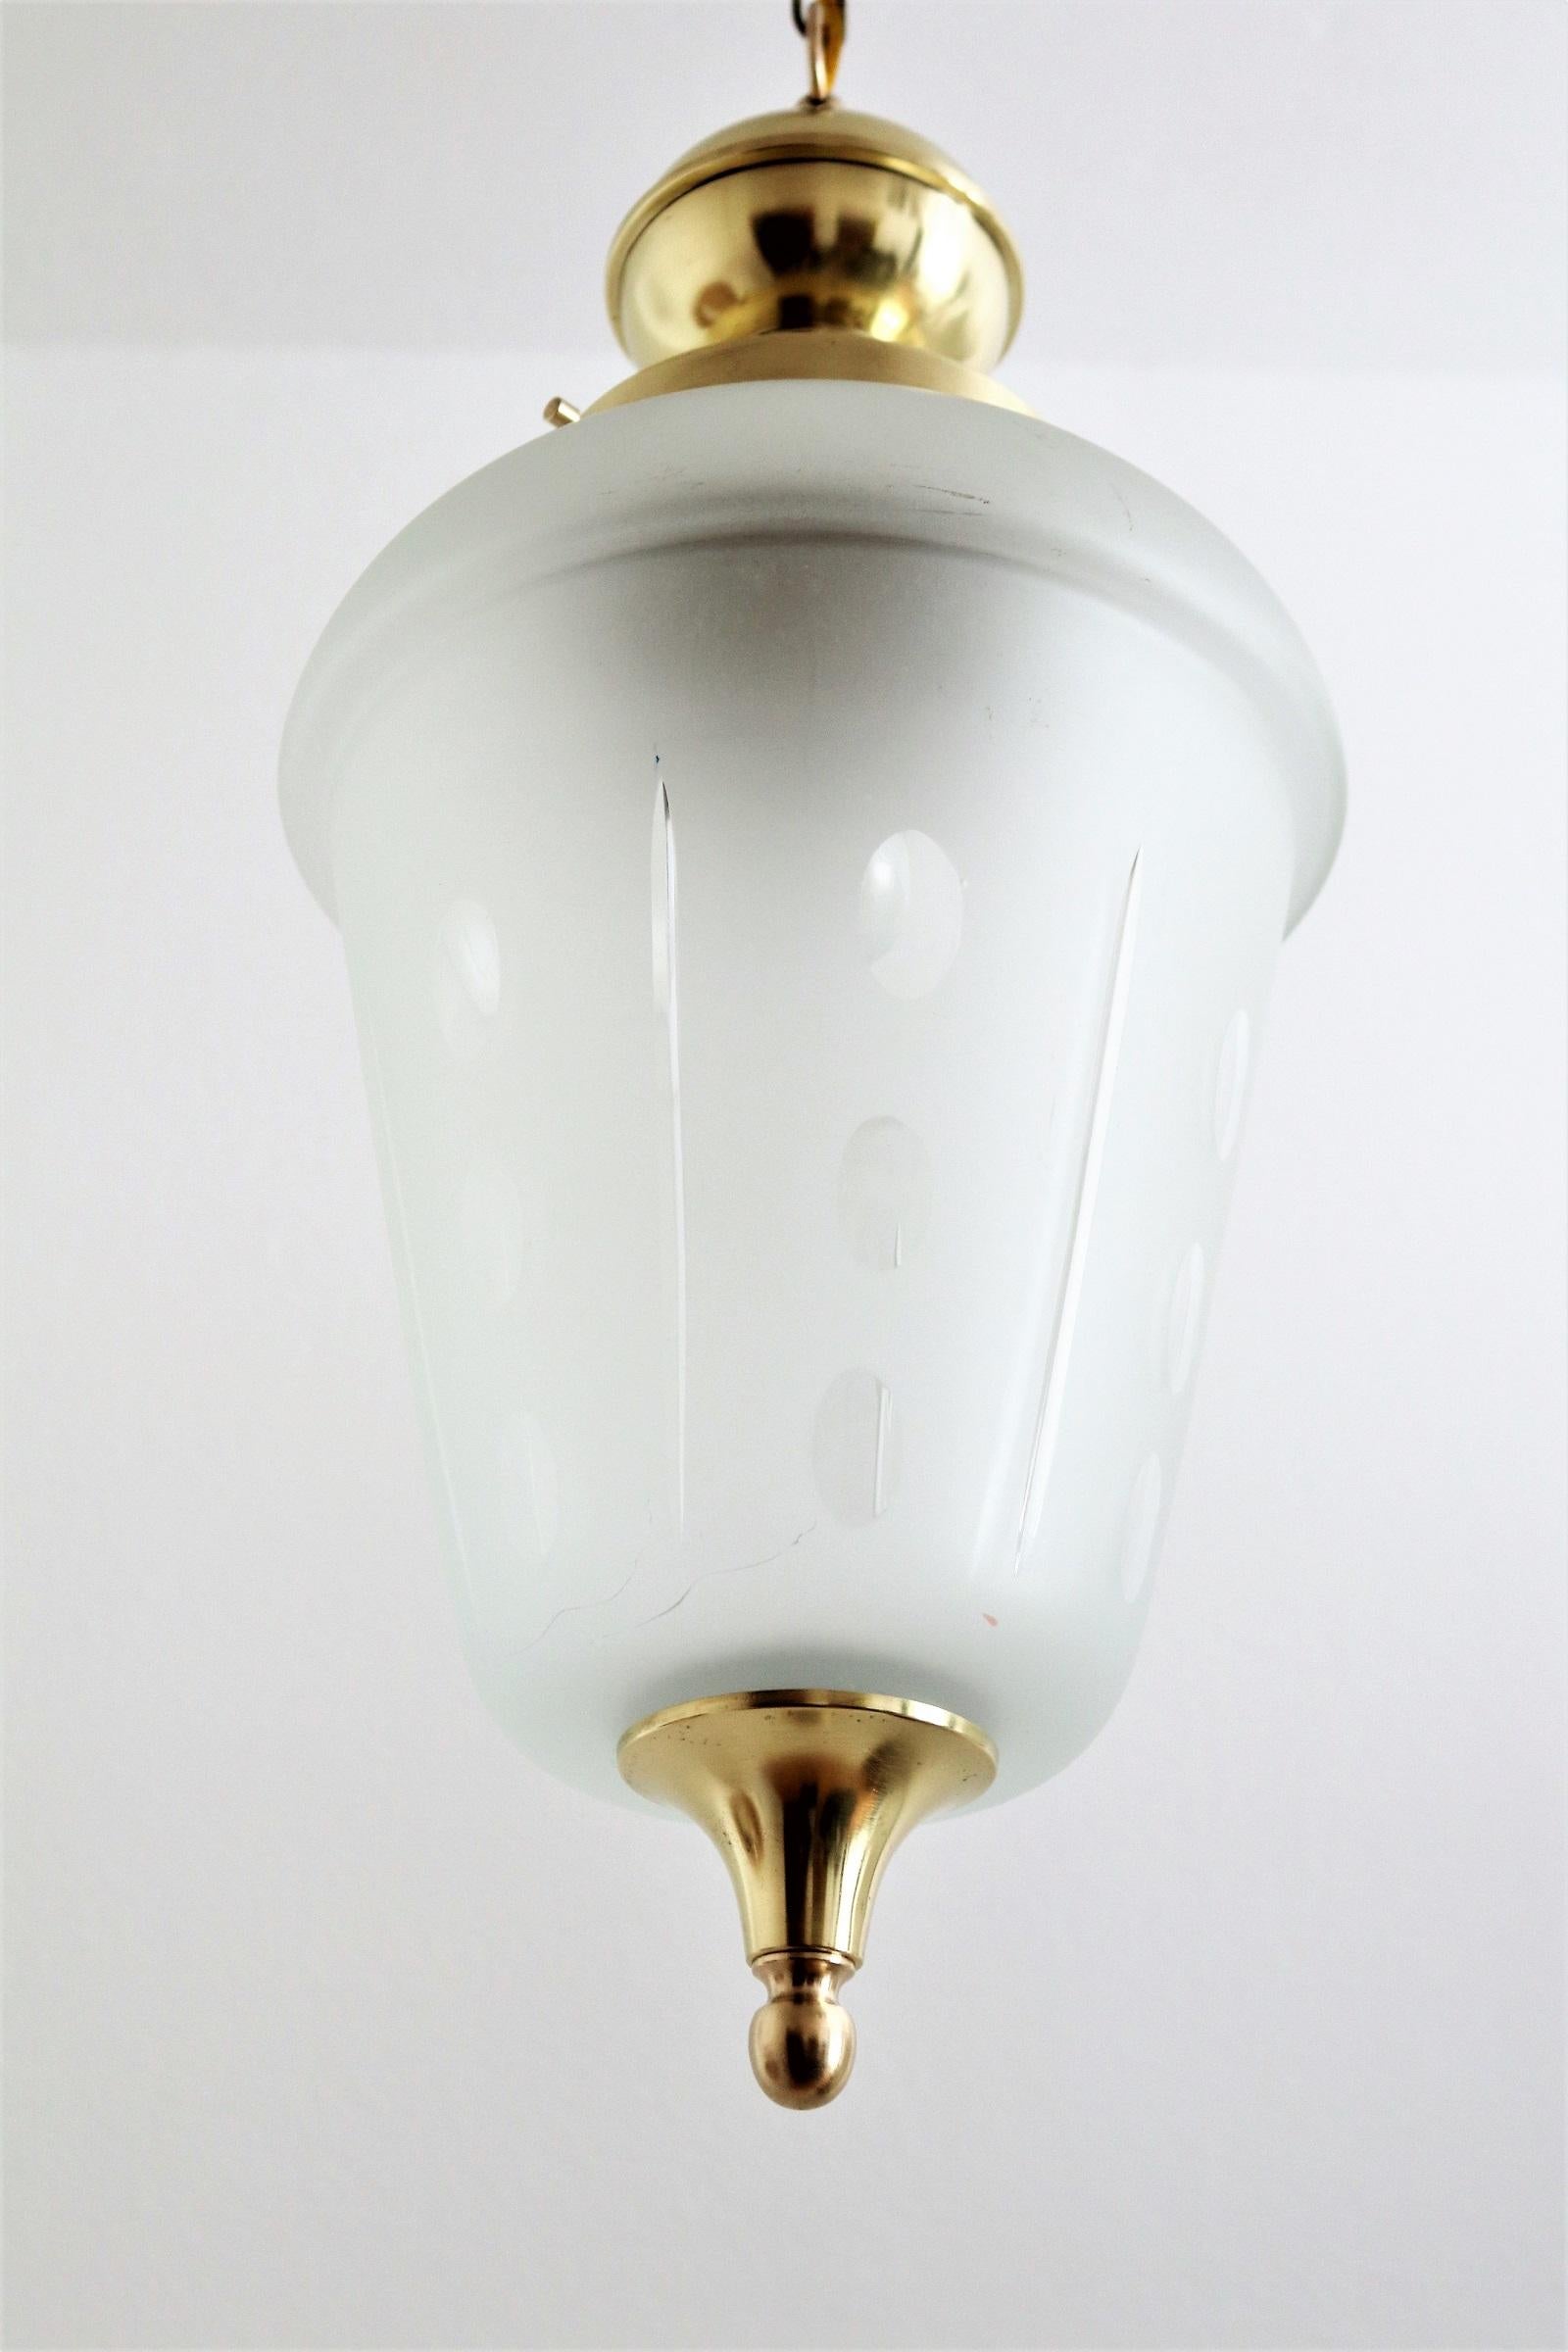 Italian Midcentury Brass and Cut Glass Pendant Lamp or Lantern, 1970s For Sale 2